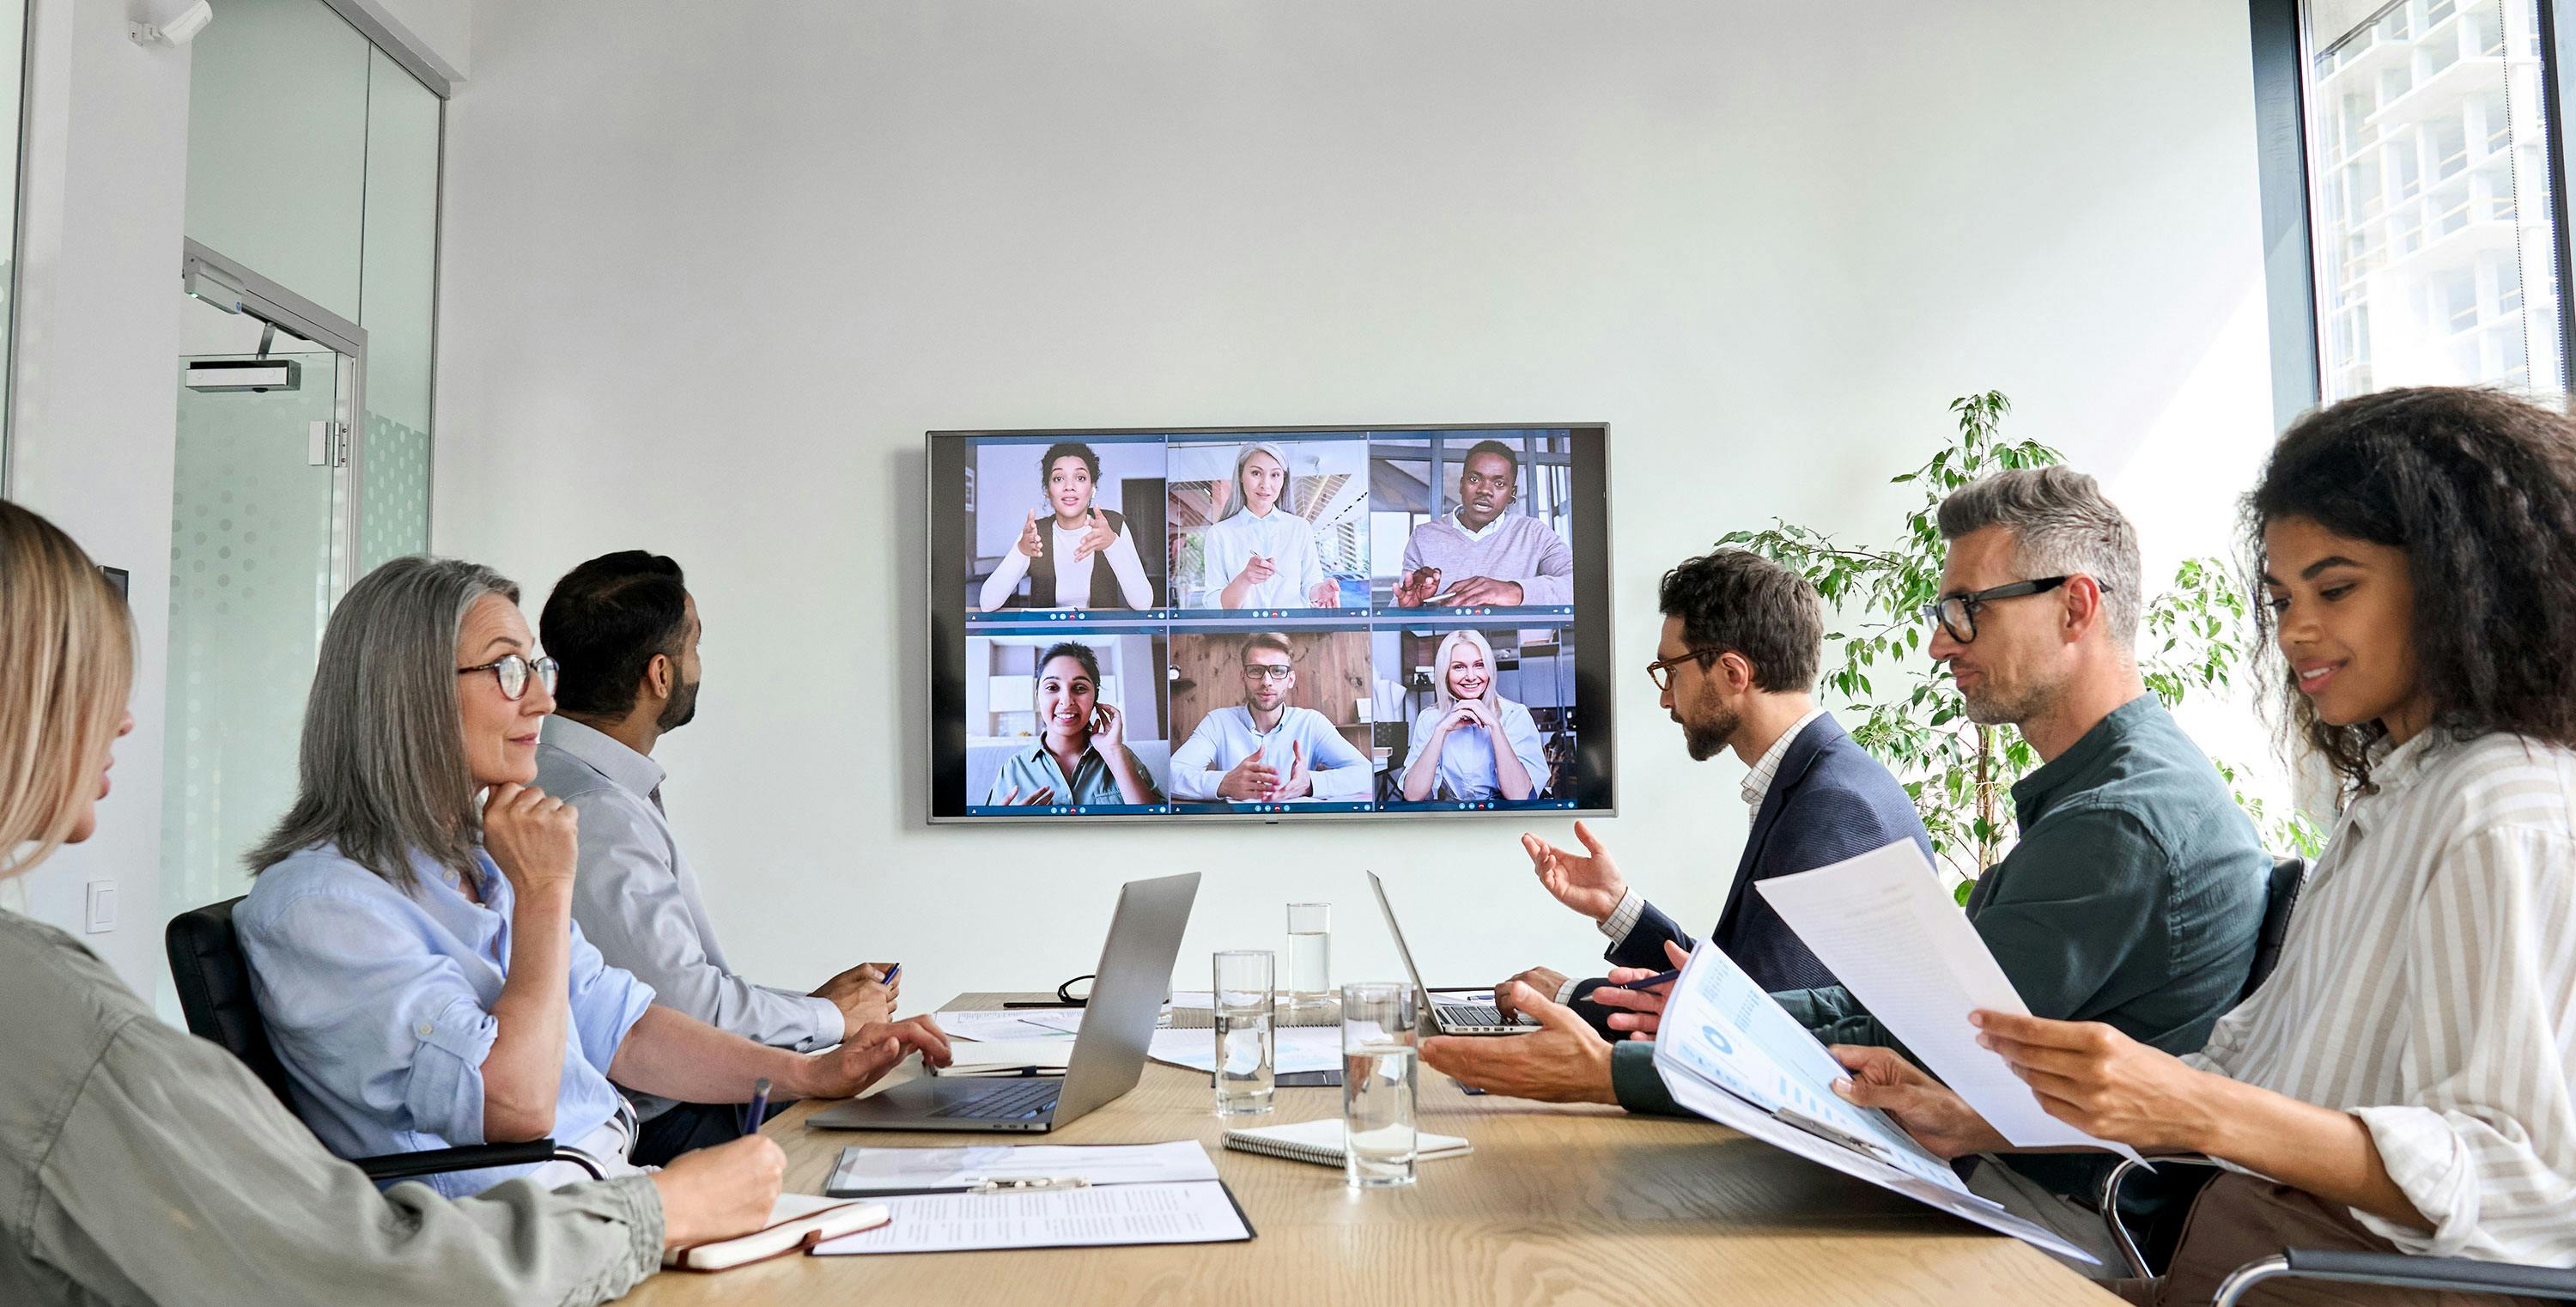 Group of people in a meeting